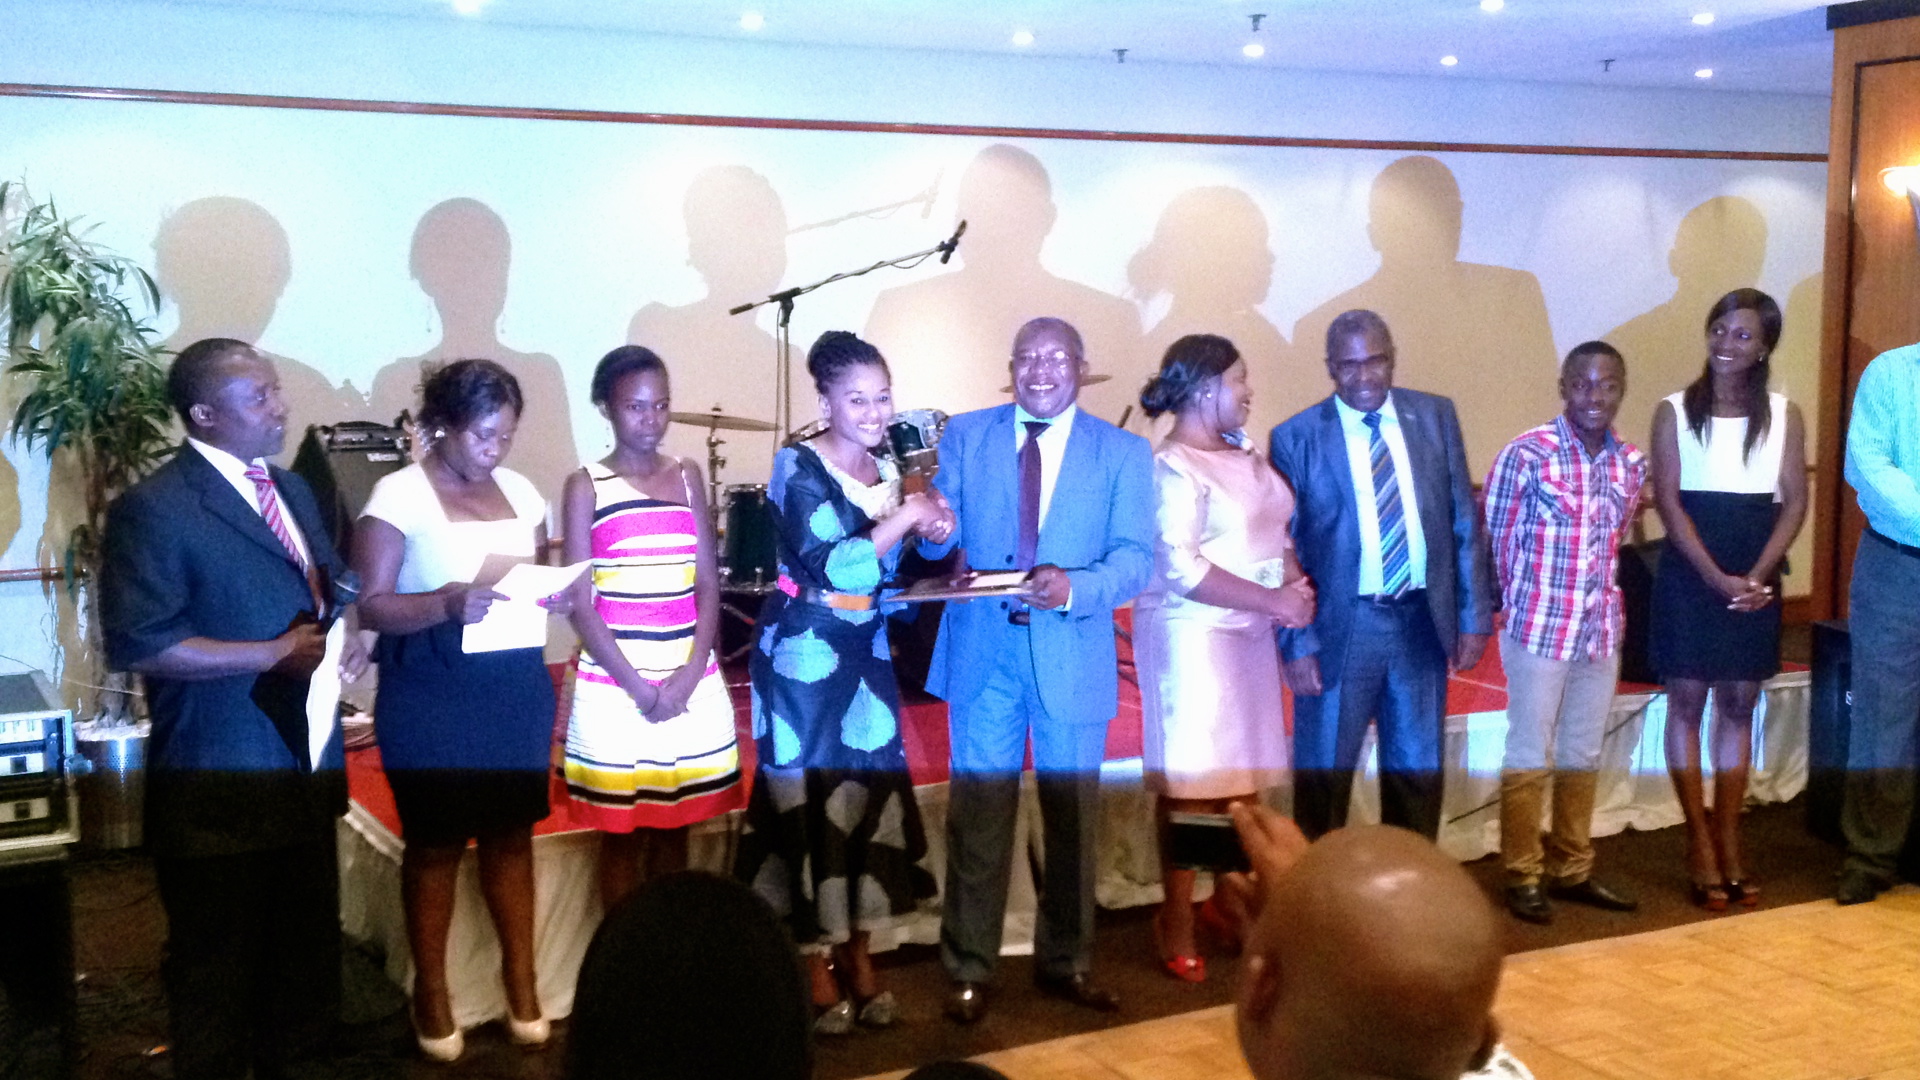 Sithembile Hlatshwayo receiving MISA and Save the Children award in Zambia